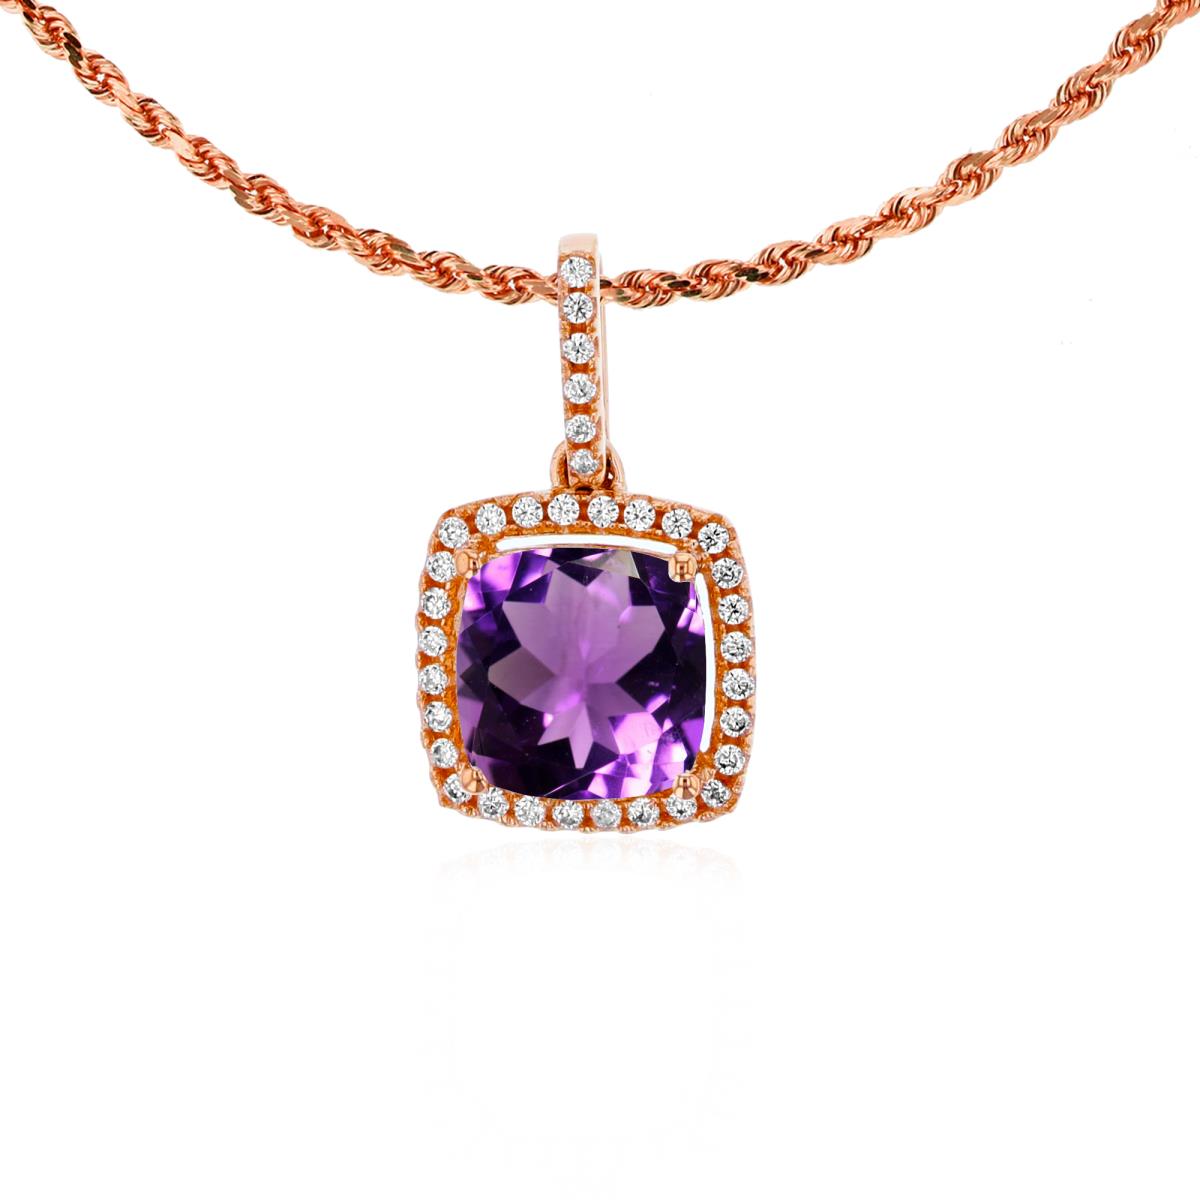 10K Rose Gold 7mm Cushion Amethyst & 0.14 CTTW Rnd Diamond Halo 18" Rope Chain Necklace